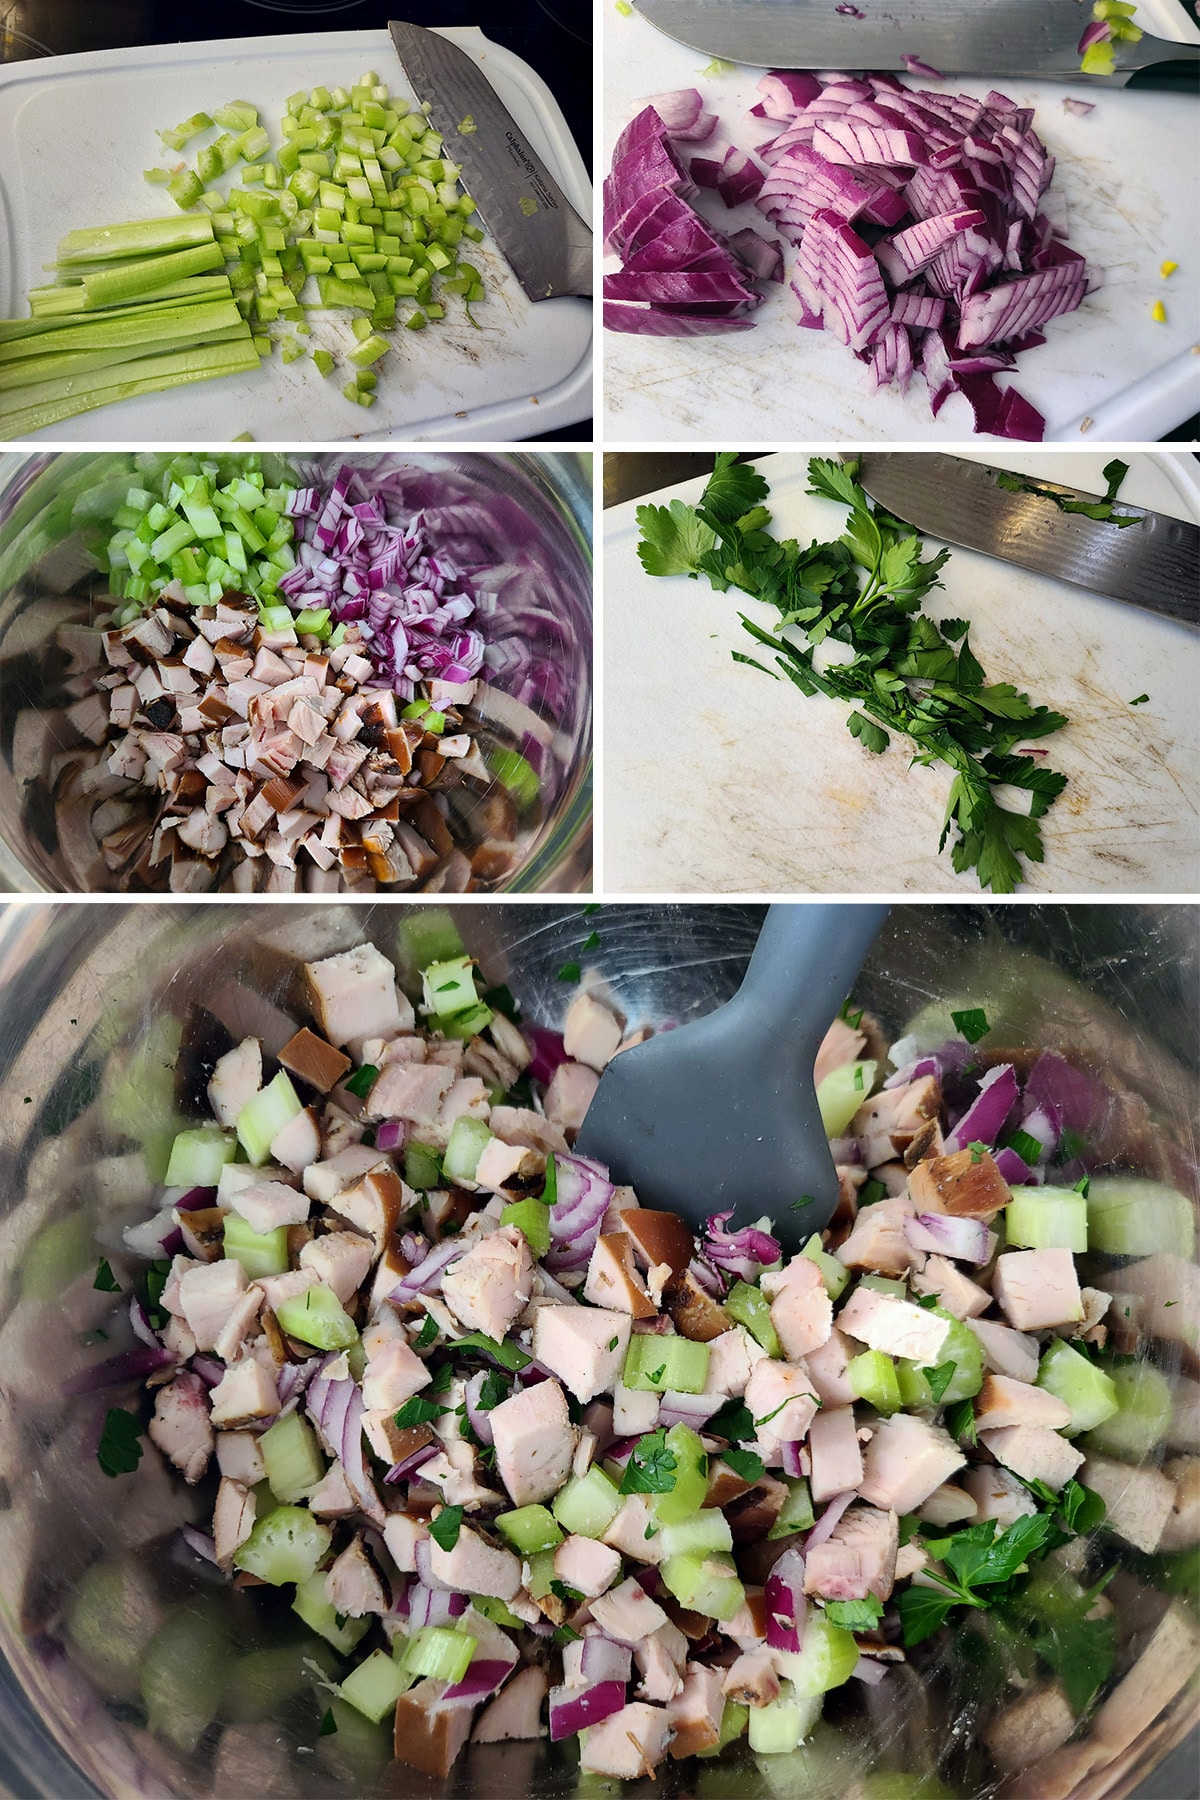 A 5 part image showing celery, onion, and parsley being chopped up and added to a bowl with the chicken.